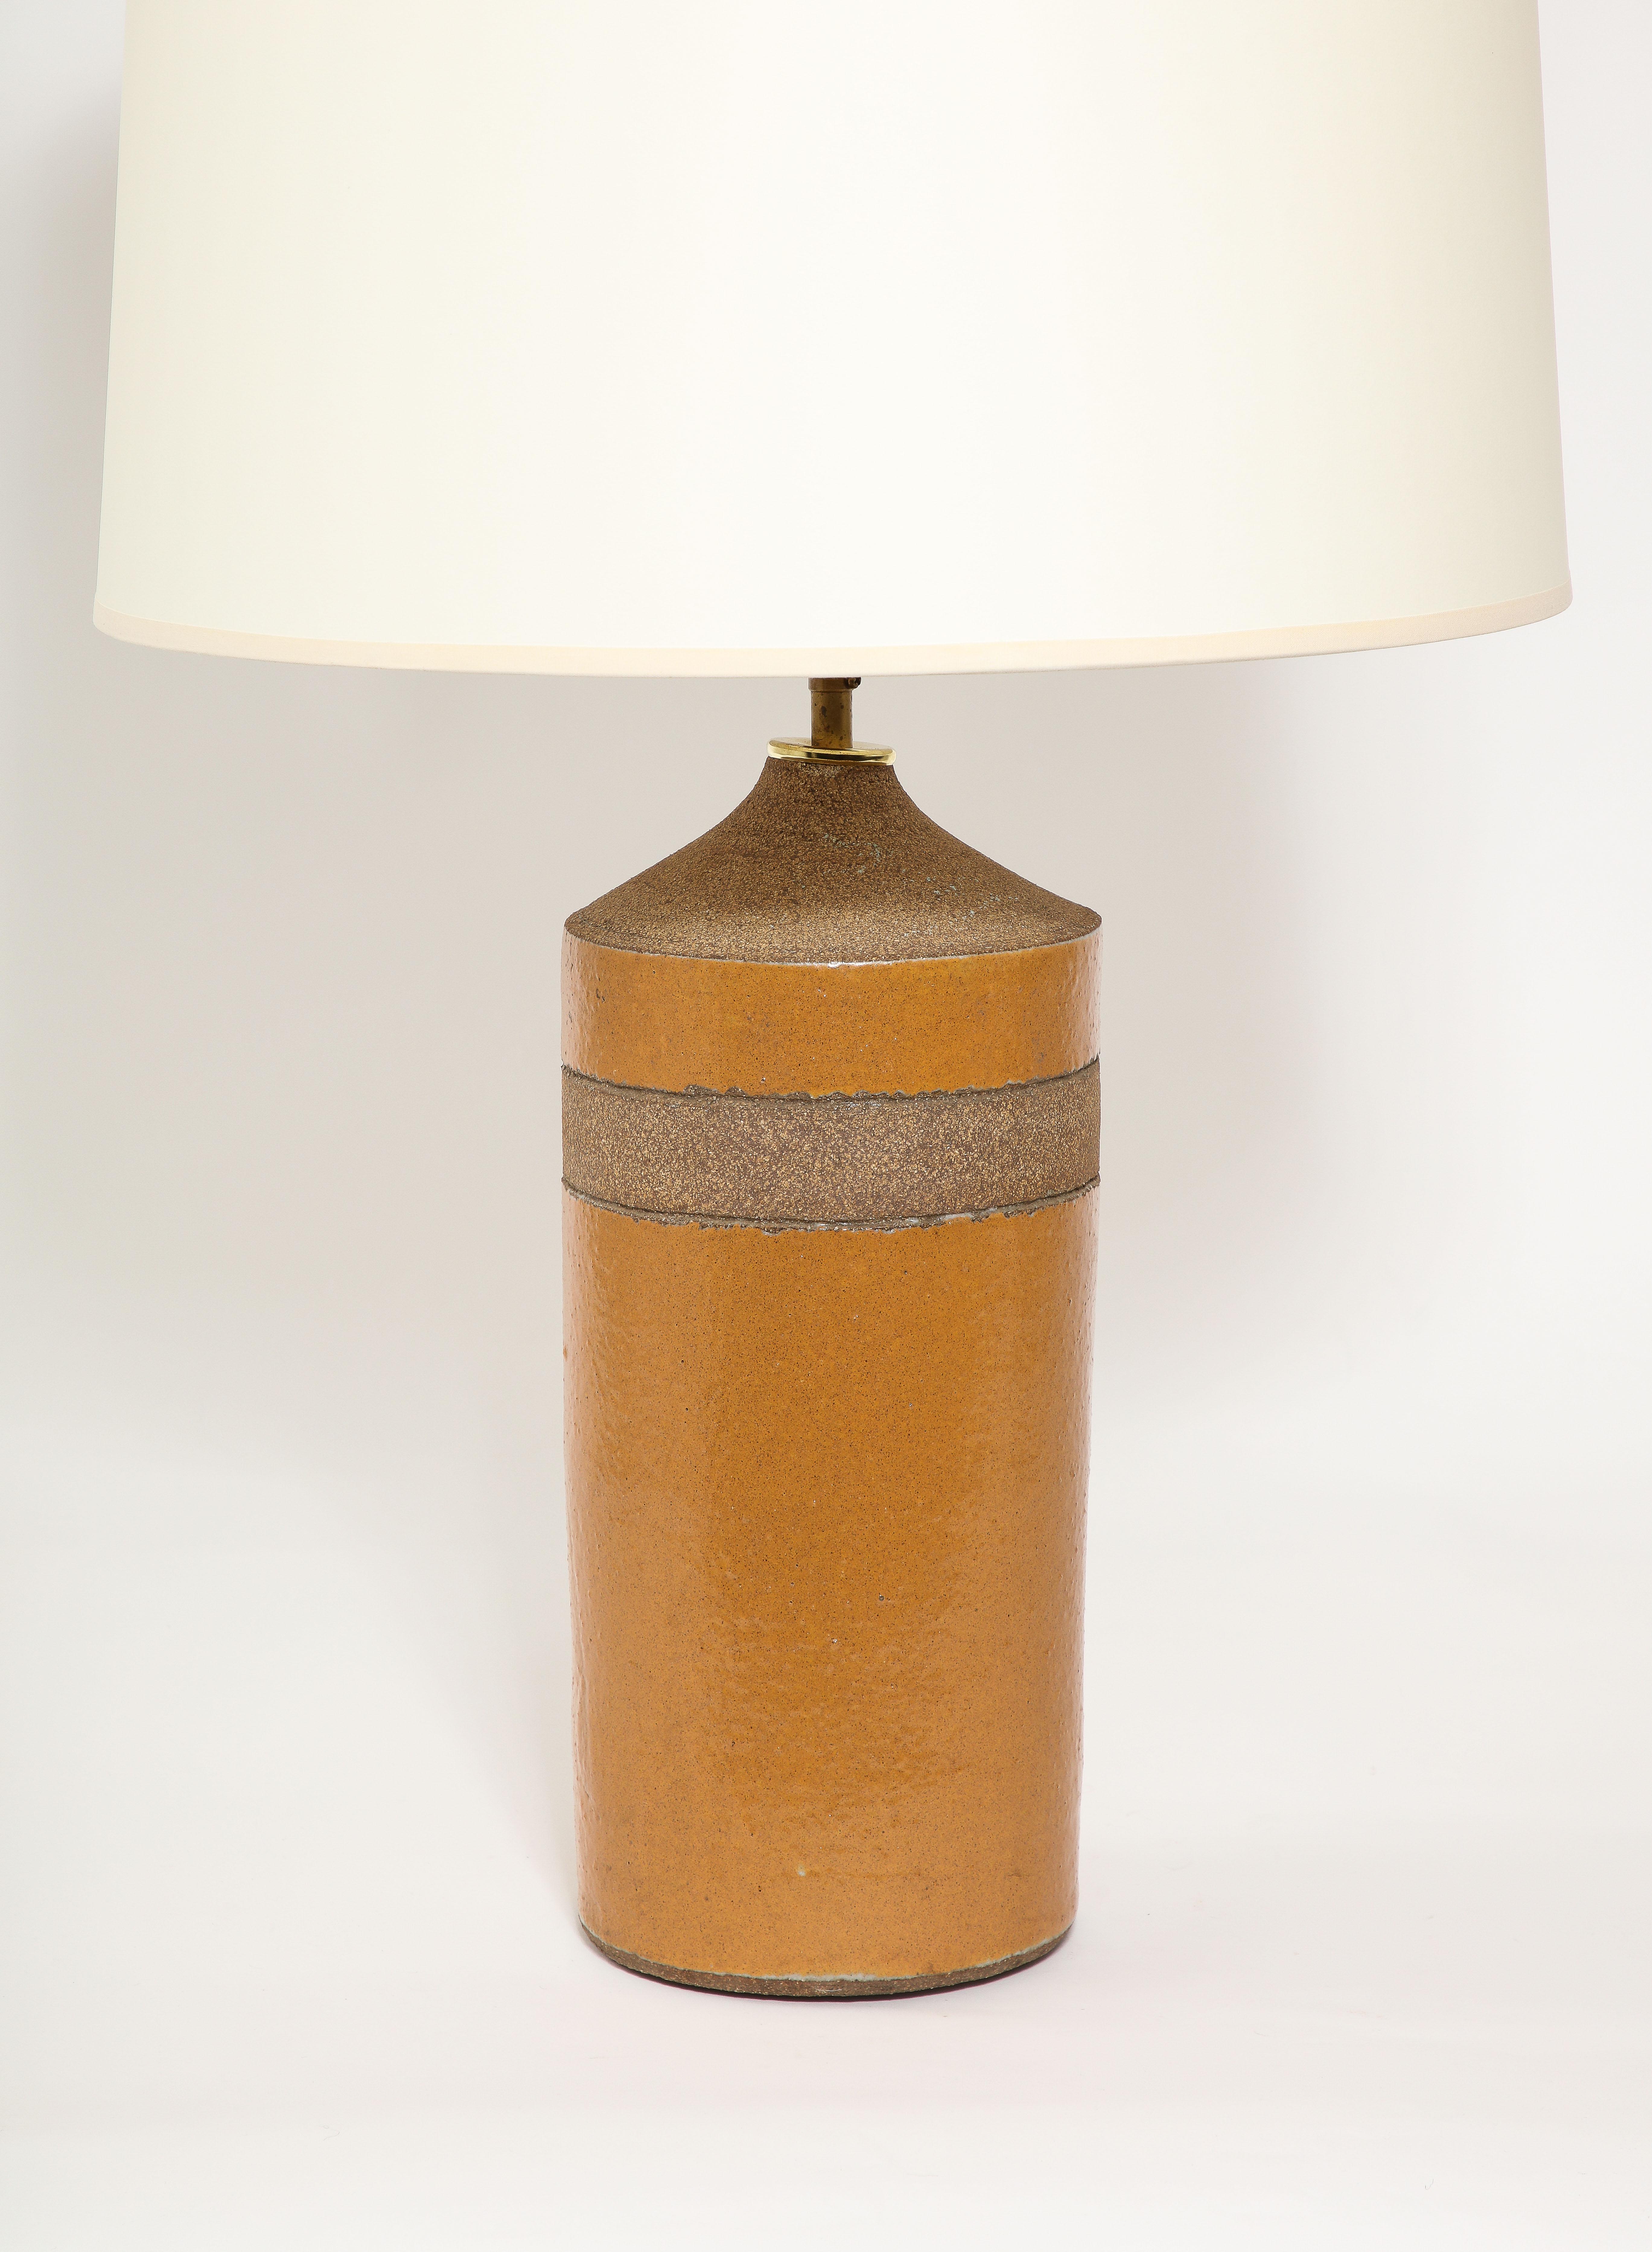 Earthenware table lamp with alternating glazed and rough textures.



21x7 Base Only